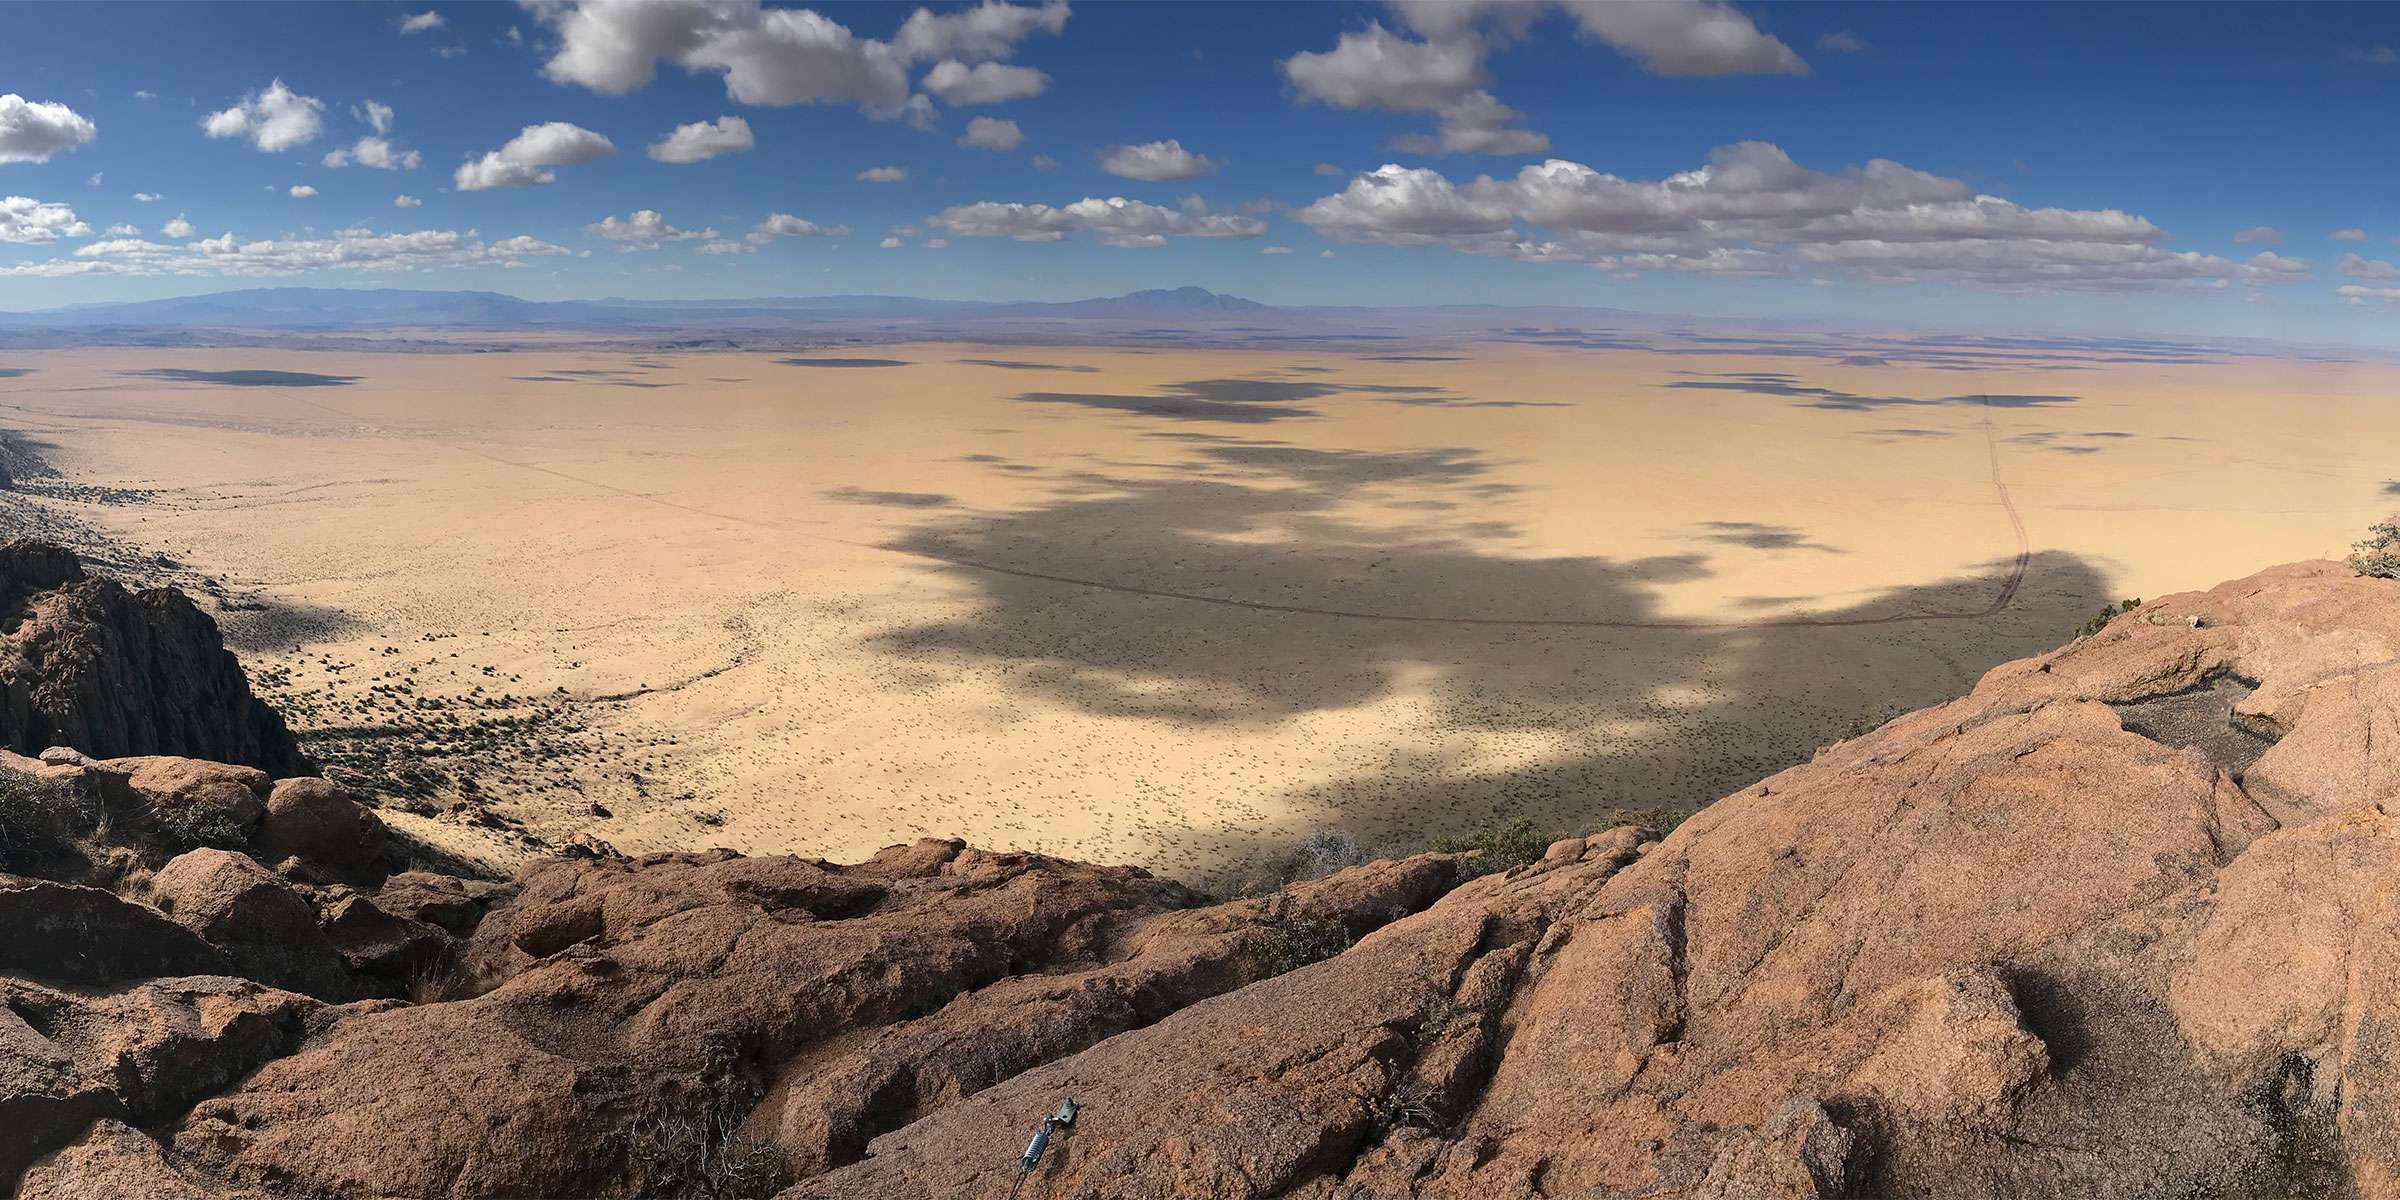 A panoramic of the Sevilleta Wildlife Refuge shows a transition from mountain foothills to desert grassland.